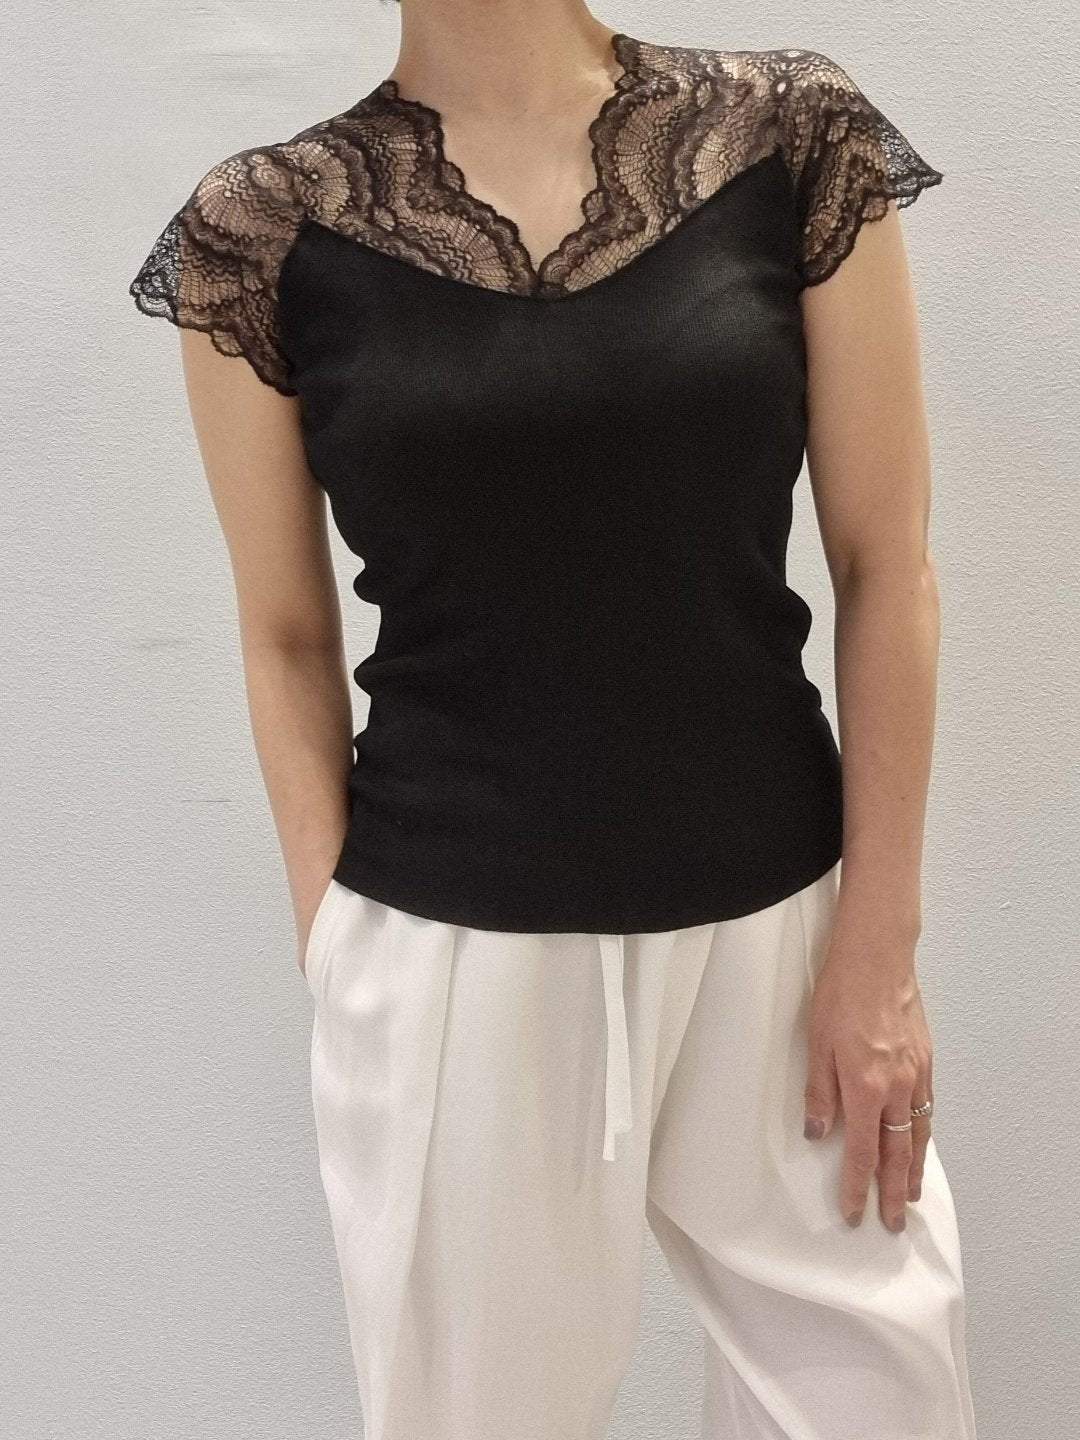 Lace Shoulder Sleeveless Top